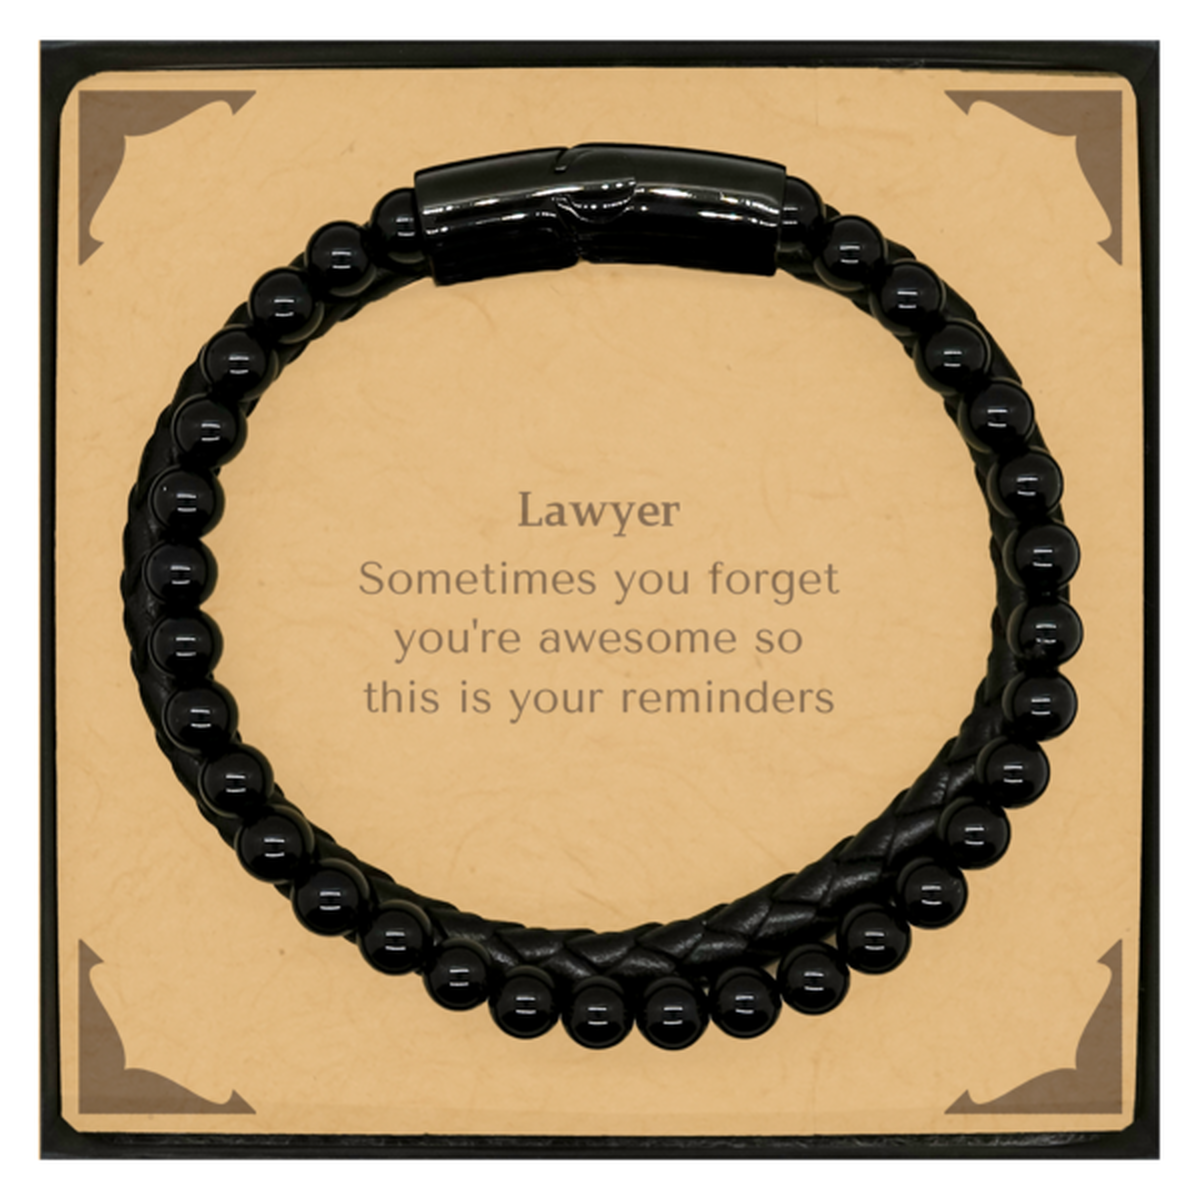 Sentimental Lawyer Stone Leather Bracelets, Lawyer Sometimes you forget you're awesome so this is your reminders, Graduation Christmas Birthday Gifts for Lawyer, Men, Women, Coworkers